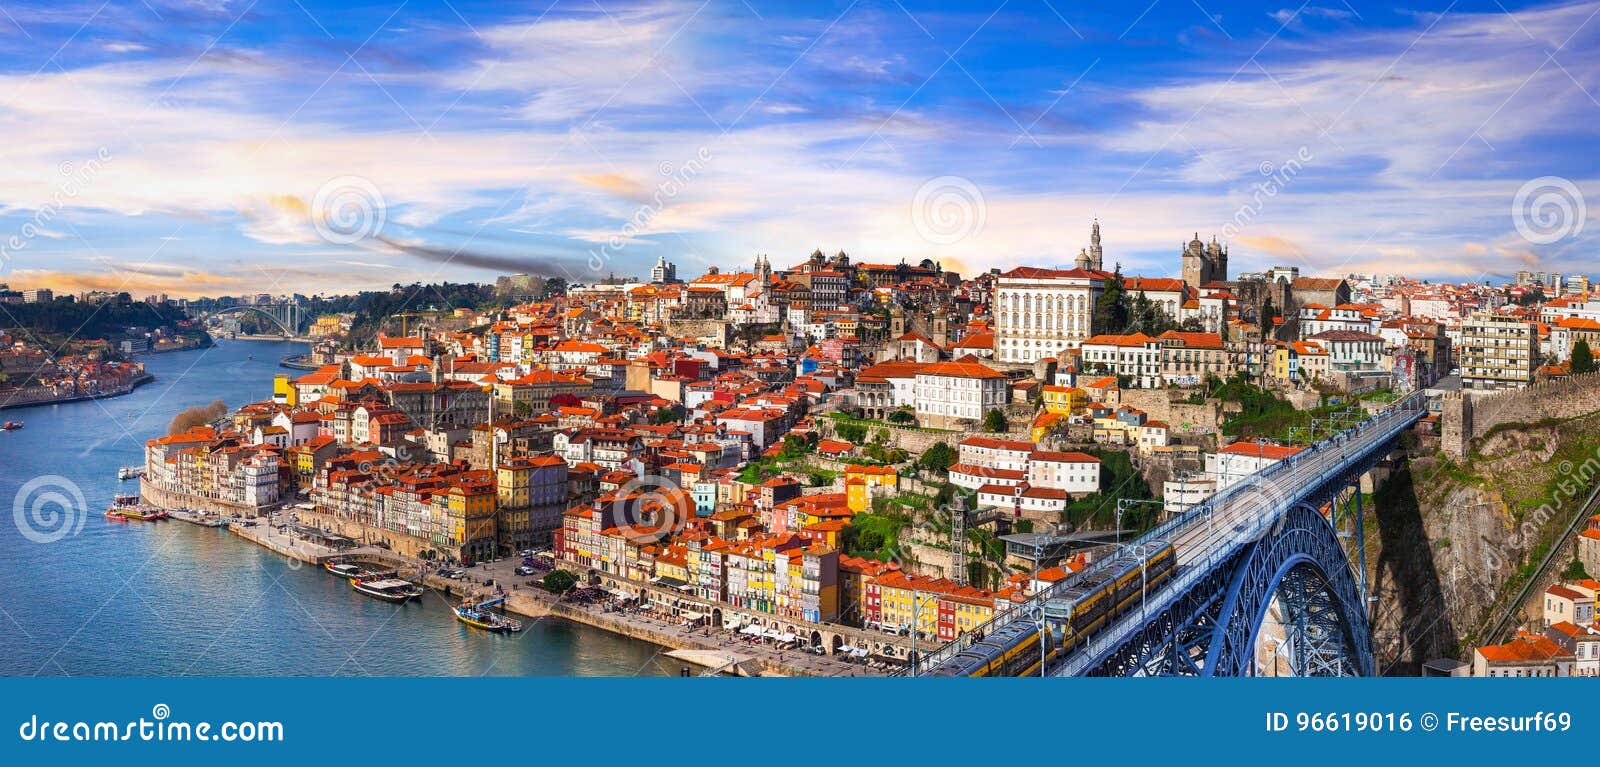 panorama of beautiful porto over sunset - view with famous bridge of luis, portugal